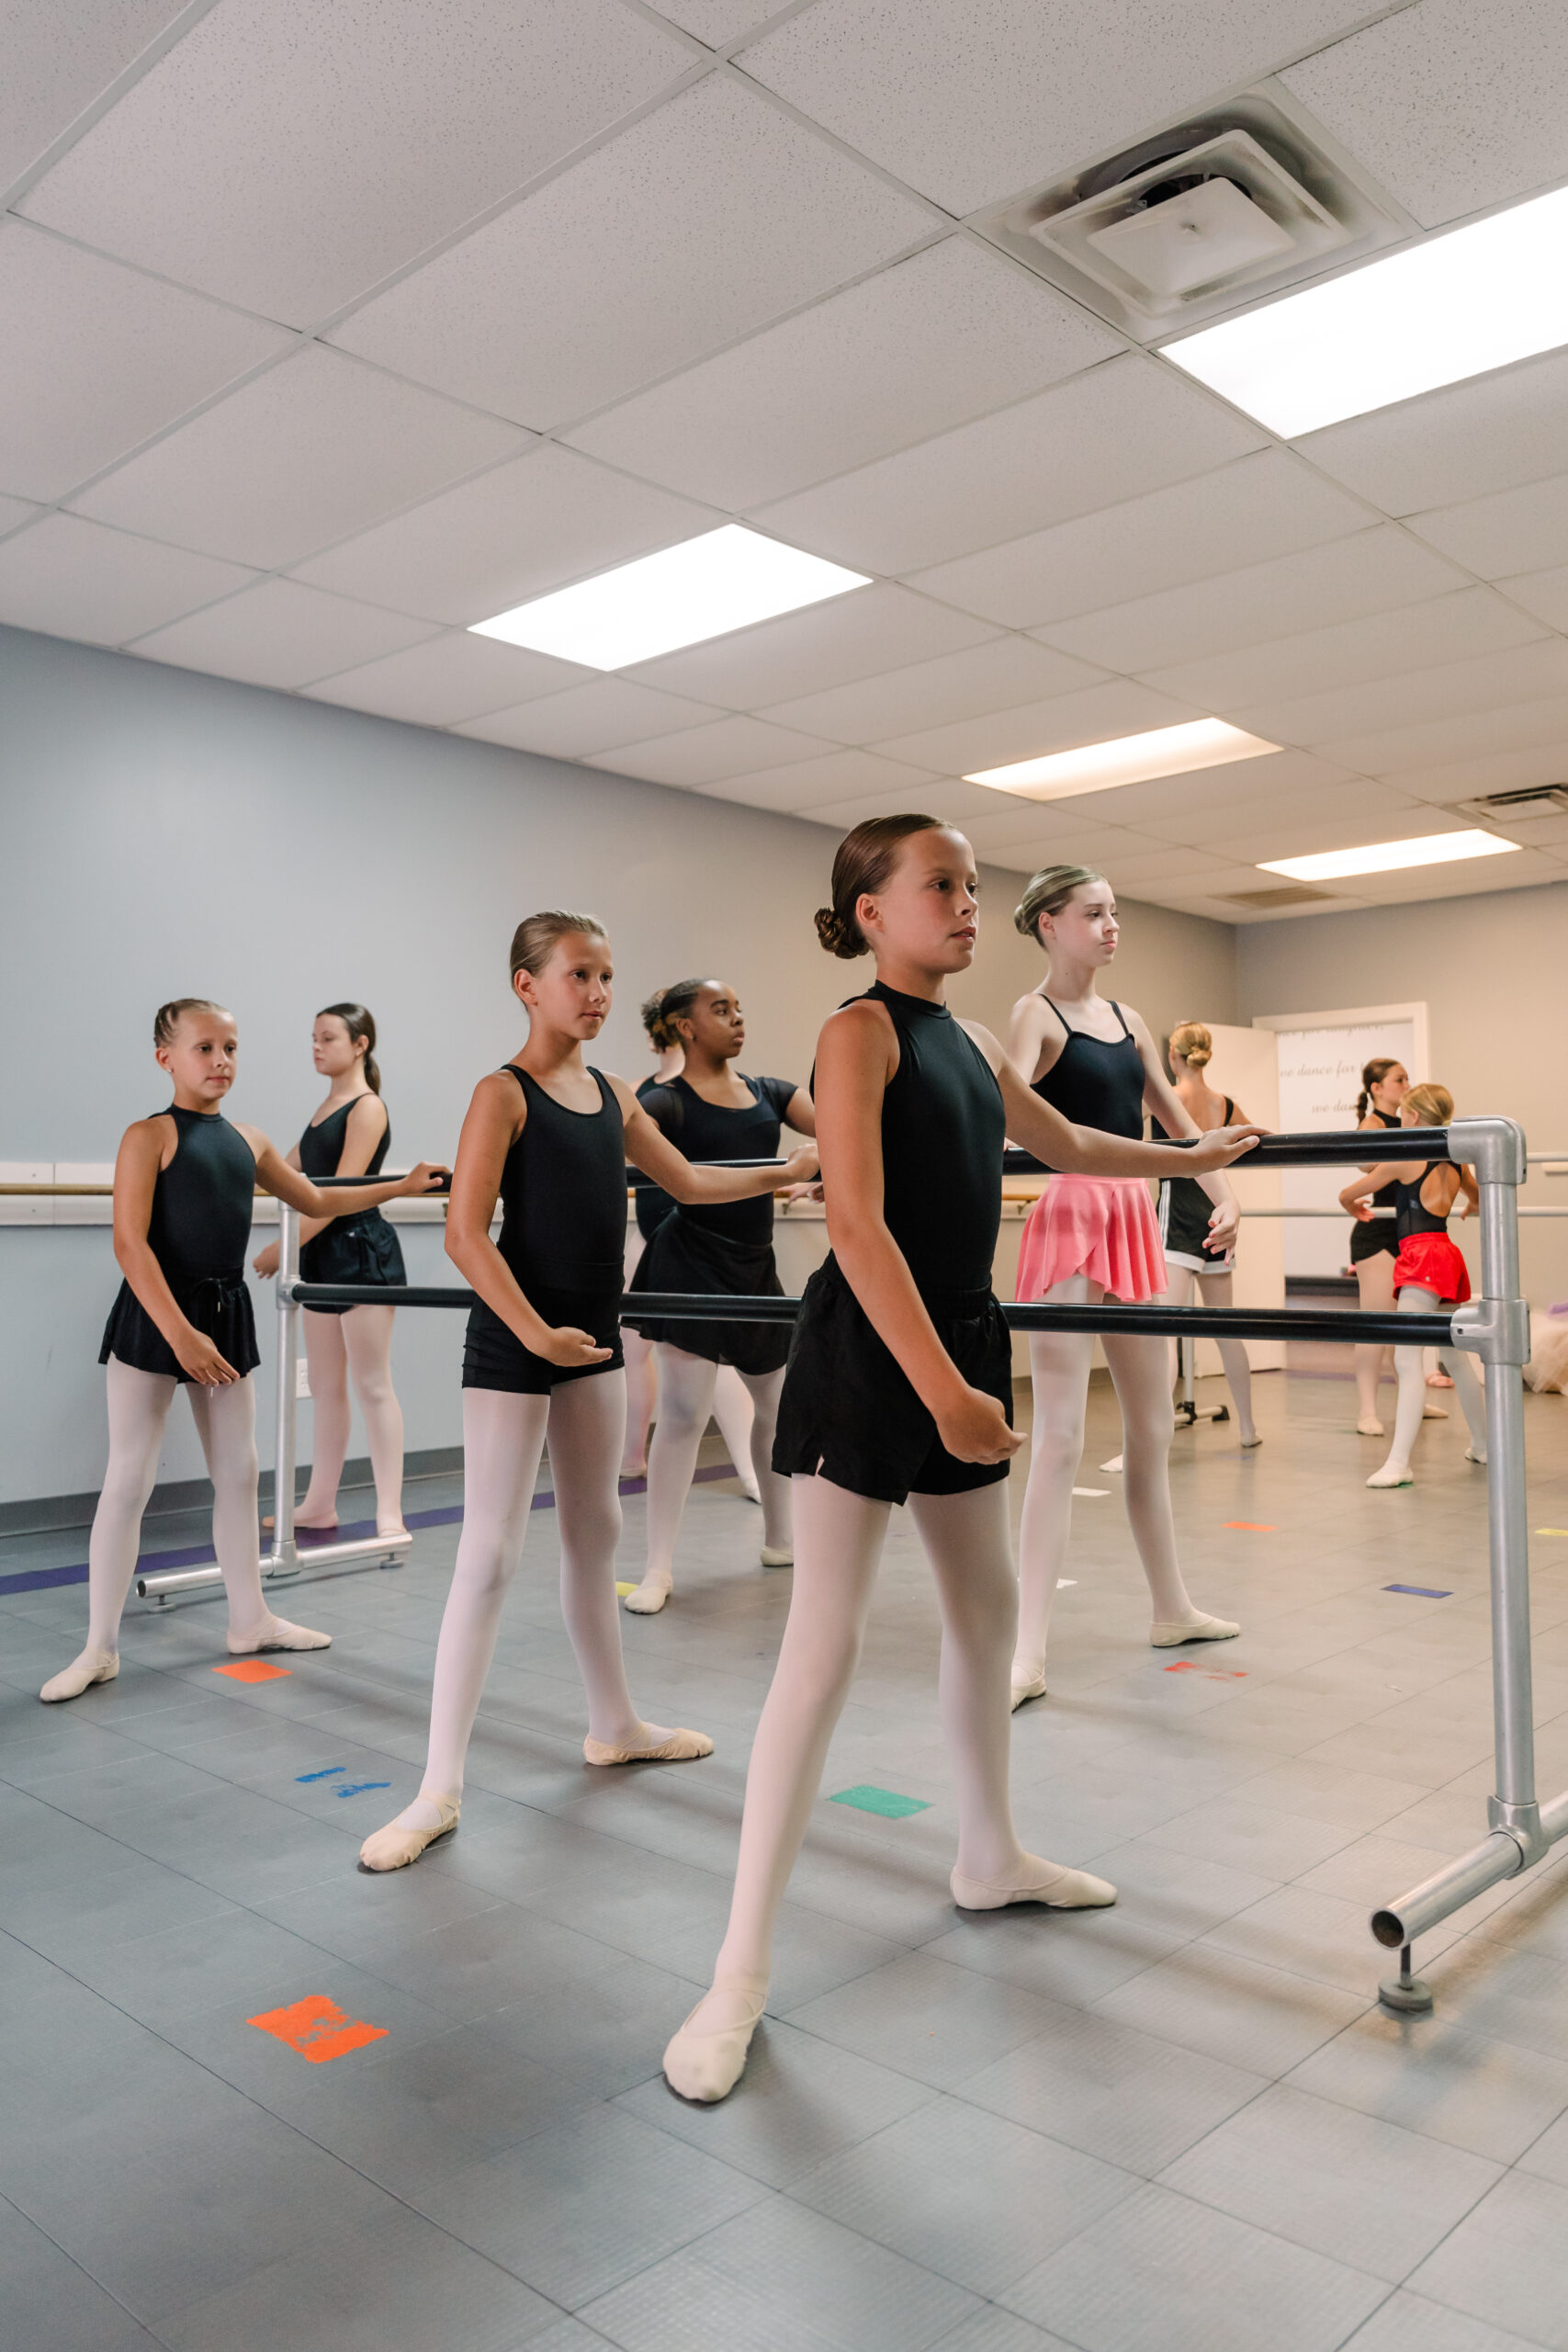 Dancers standing at the barre at the On Stage dance studio in High Point, NC.